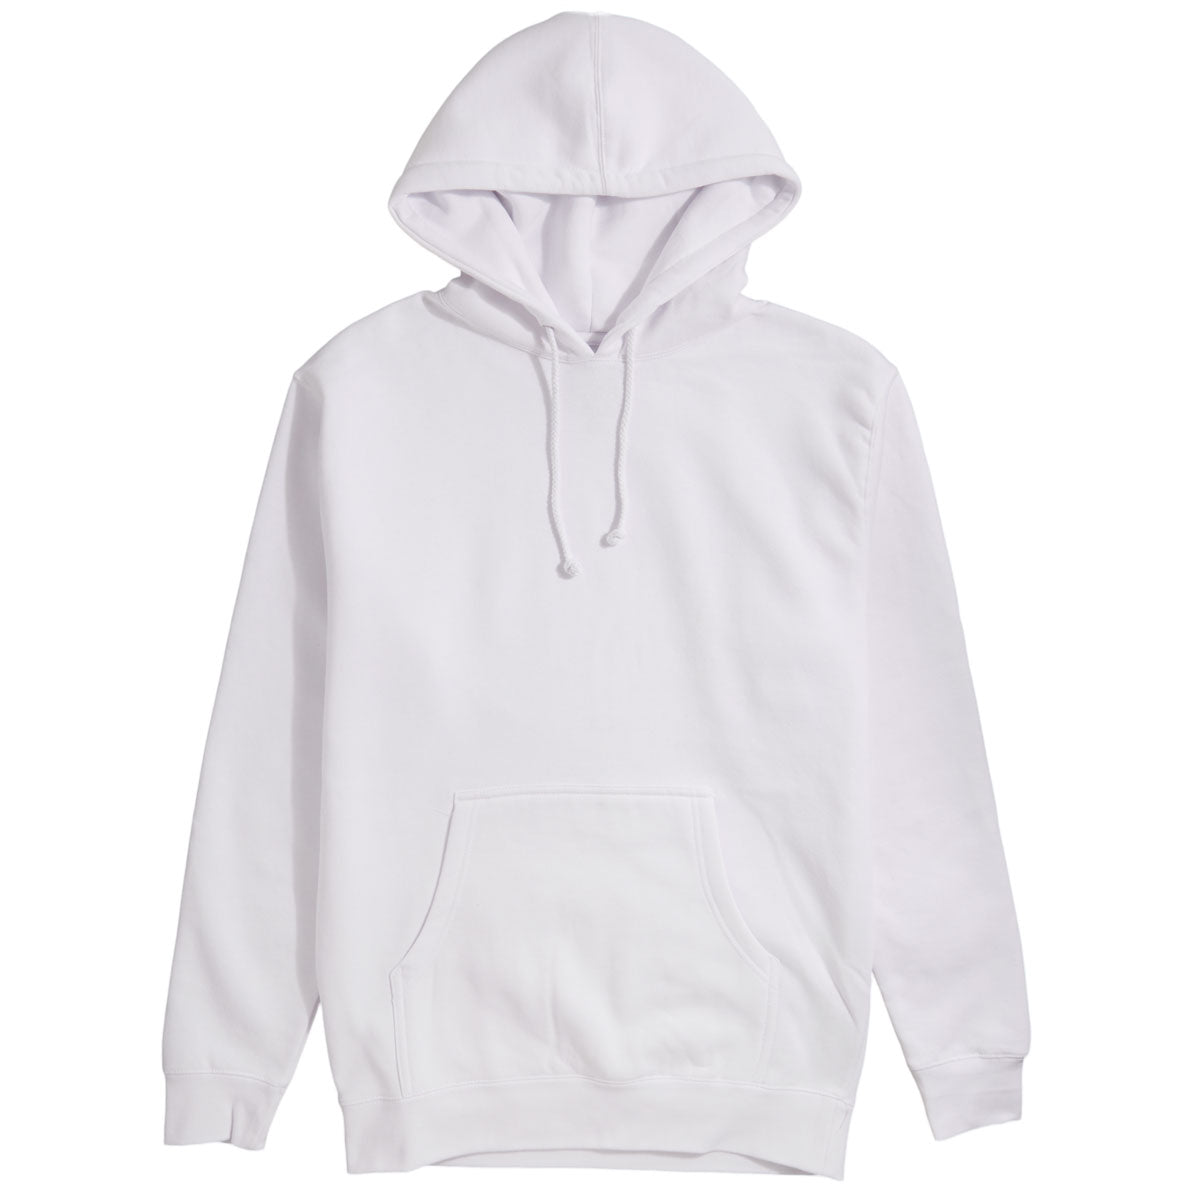 CCS Staple Pullover Hoodie - White image 1